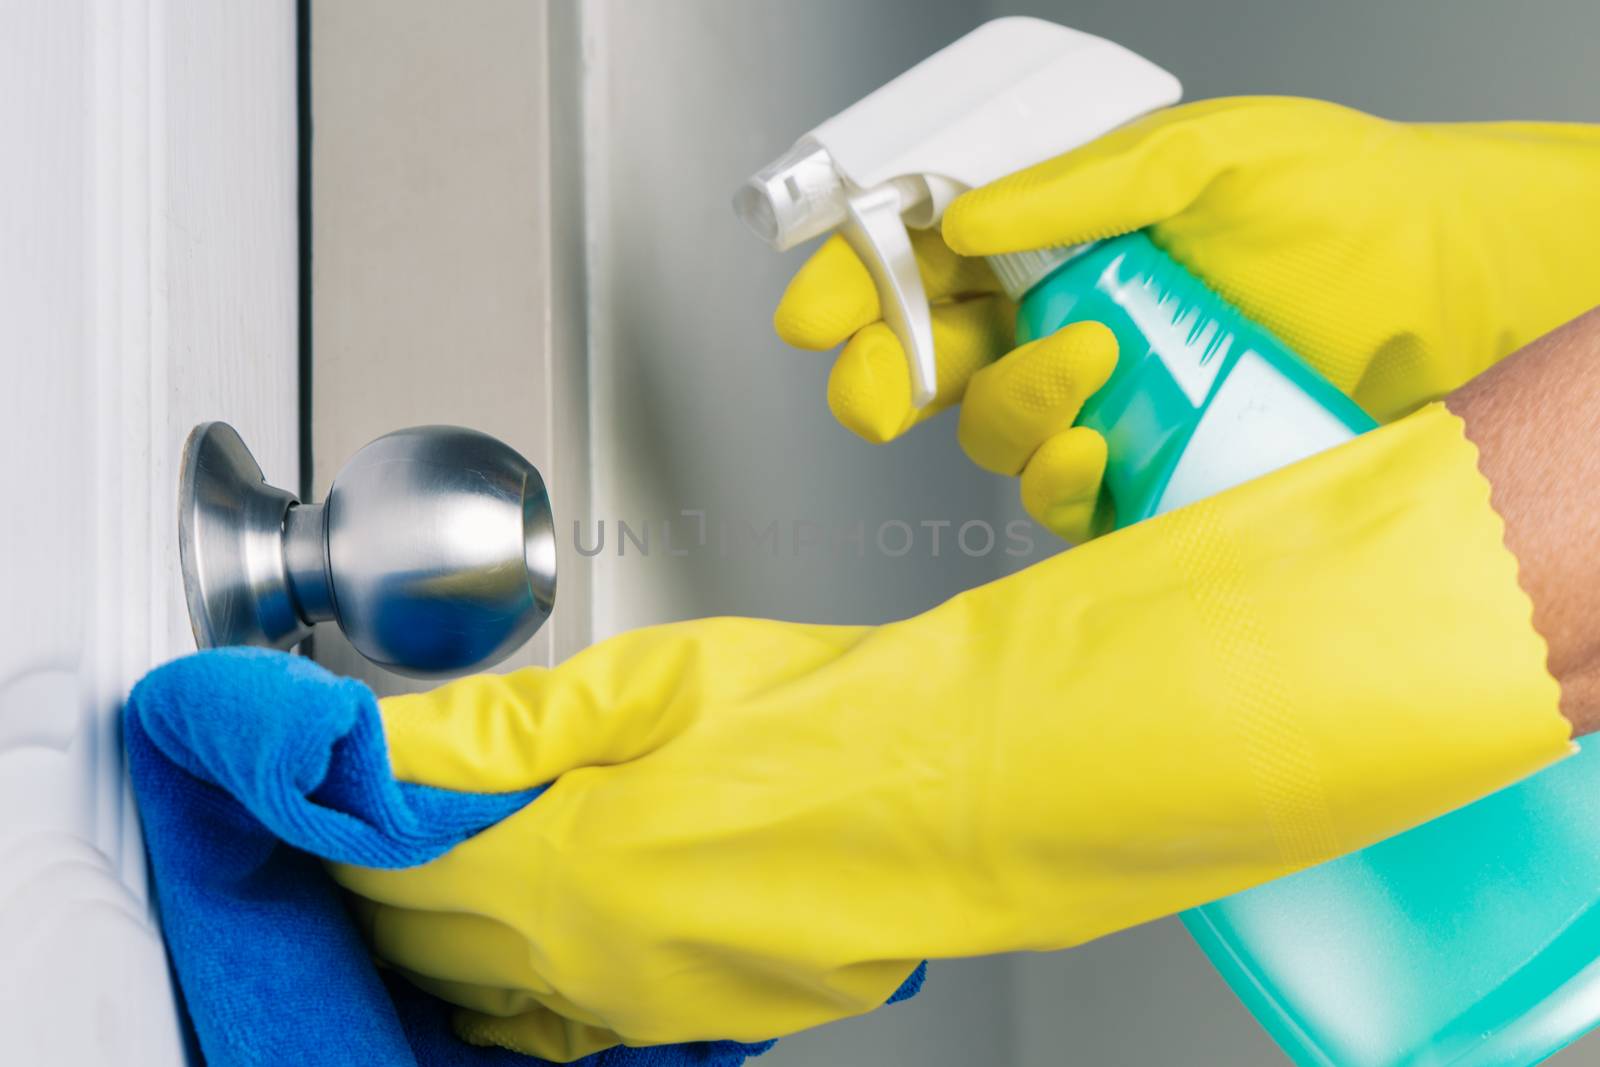 Cleaning door knob with alcohol spray for Covid-19 Coronavirus p by psodaz